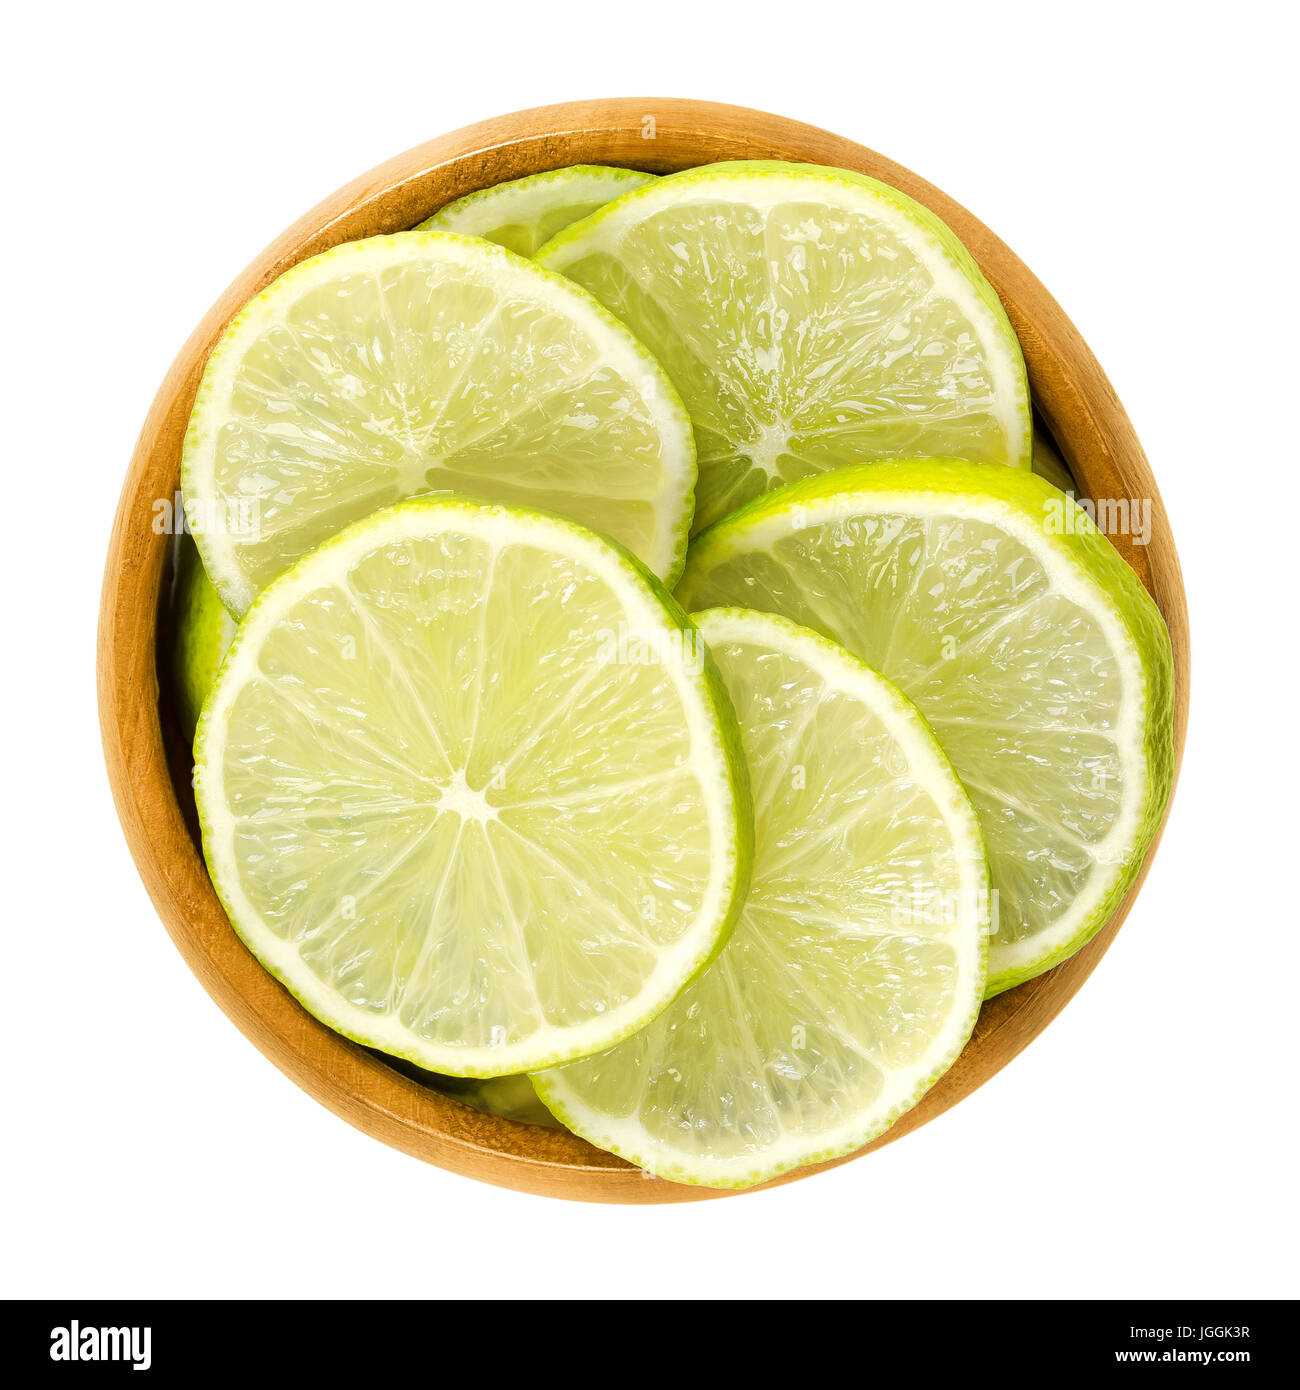 Lime slices in wooden bowl. Fresh cut unripe green edible citrus fruit discs. Key lime, Citrus aurantiifolia. Isolated macro food photo close up. Stock Photo